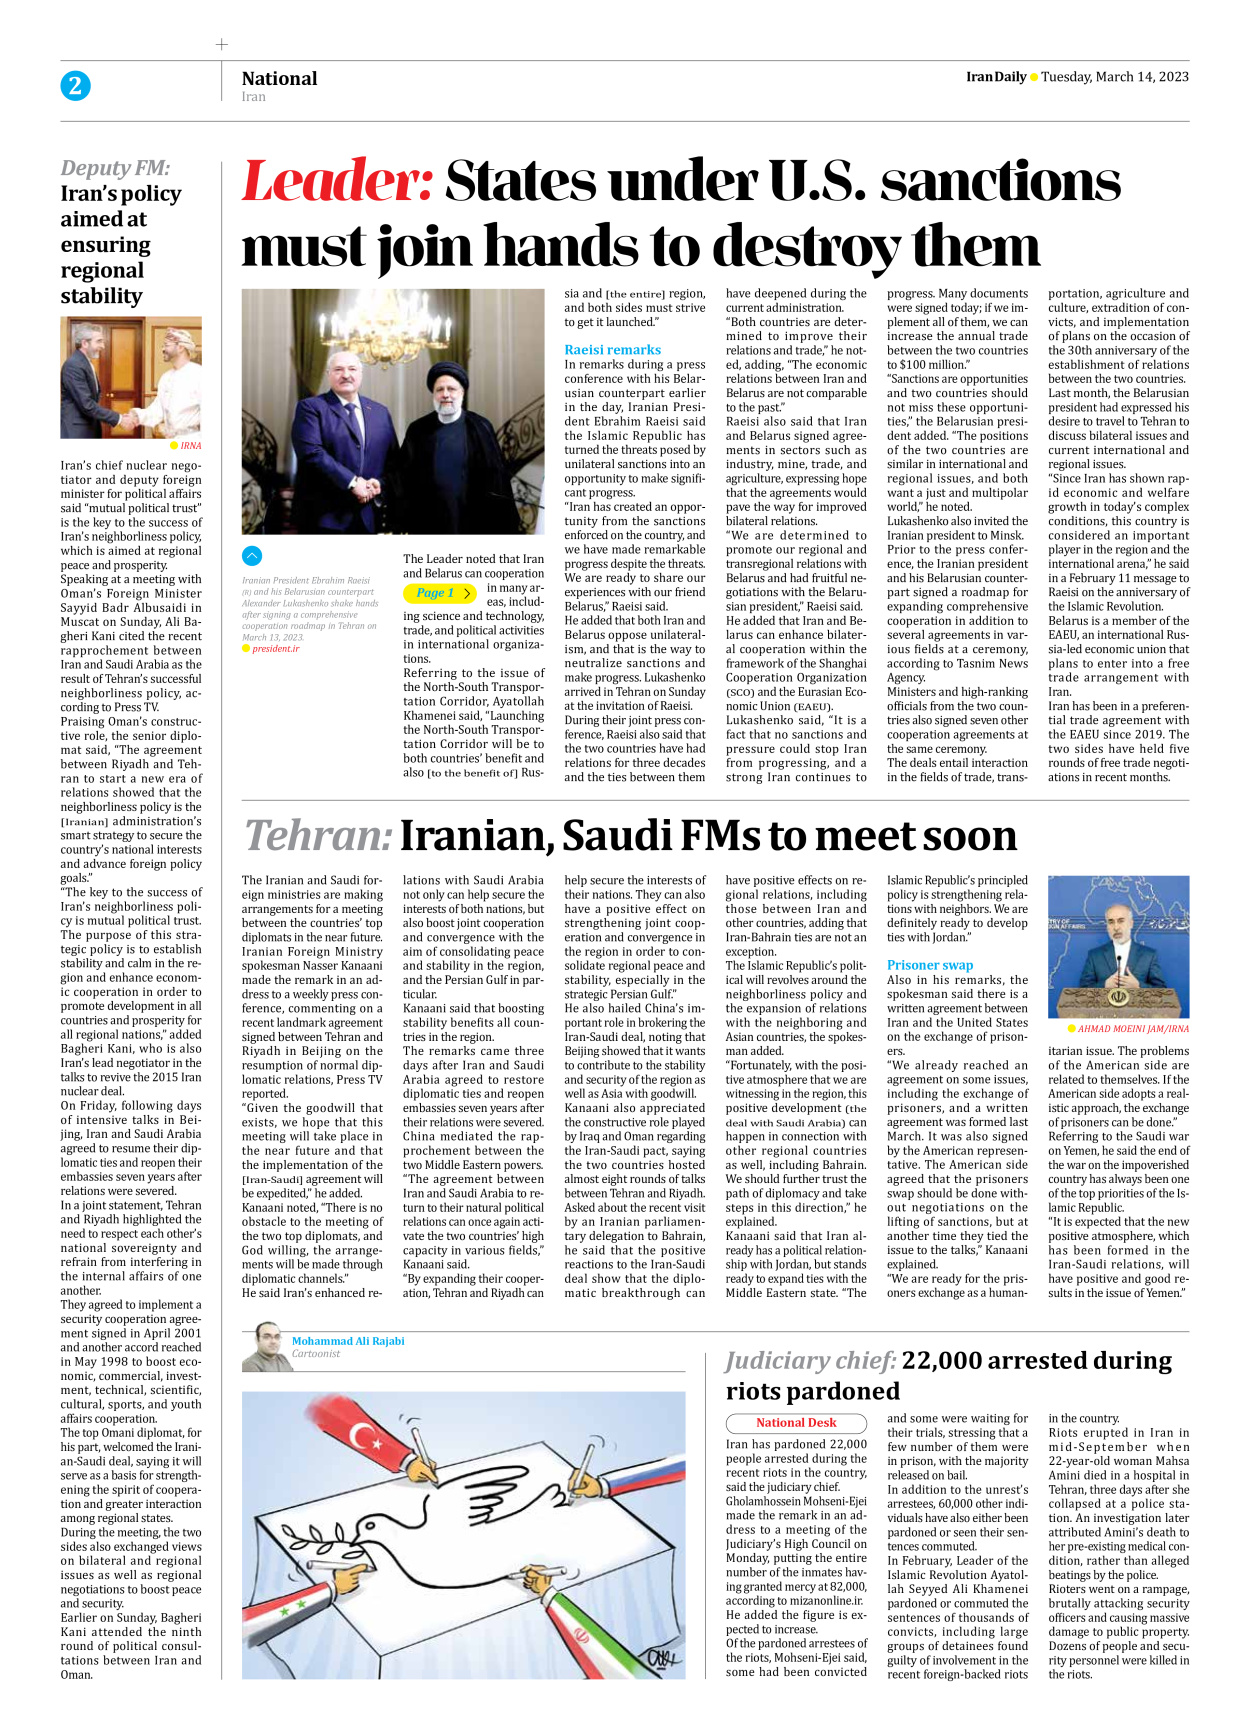 Iran Daily - Number Seven Thousand Two Hundred and Fifty Seven - 14 March 2023 - Page 2